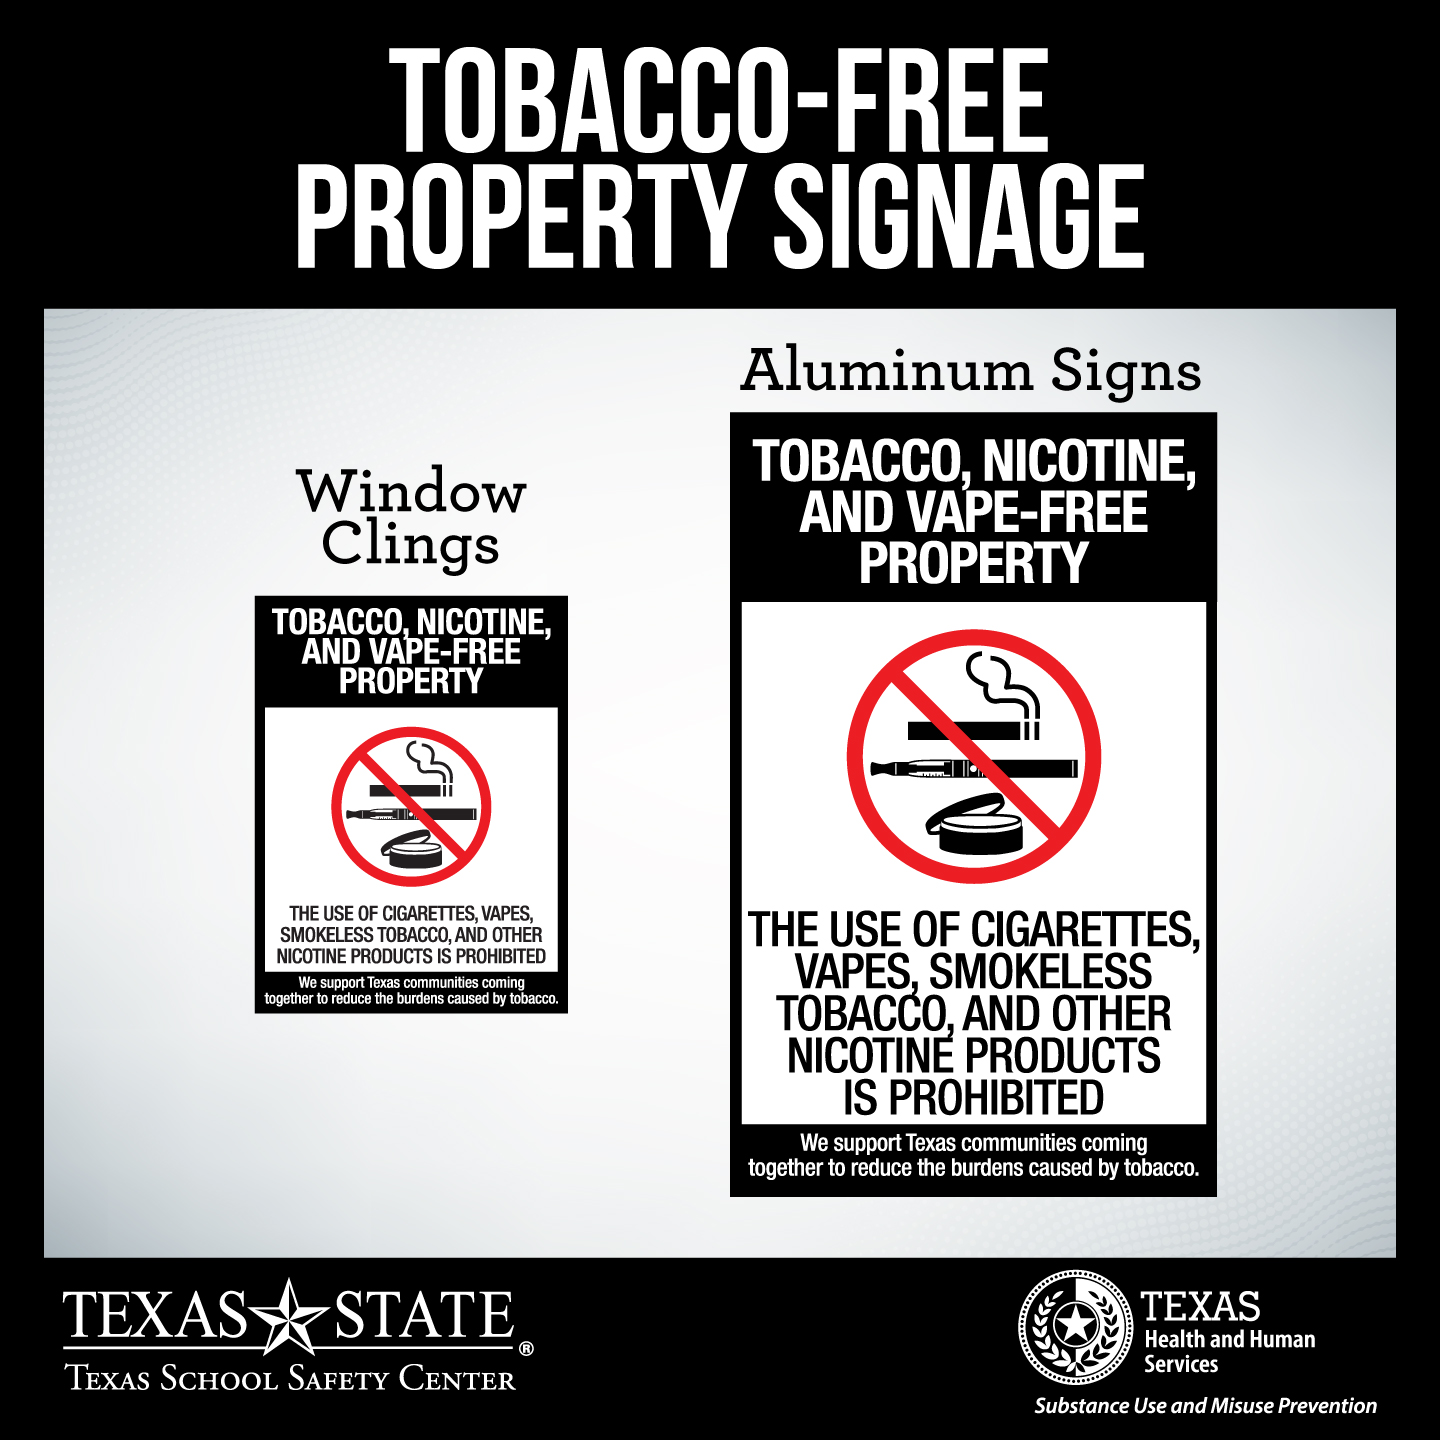 tobacco-free property signage examples